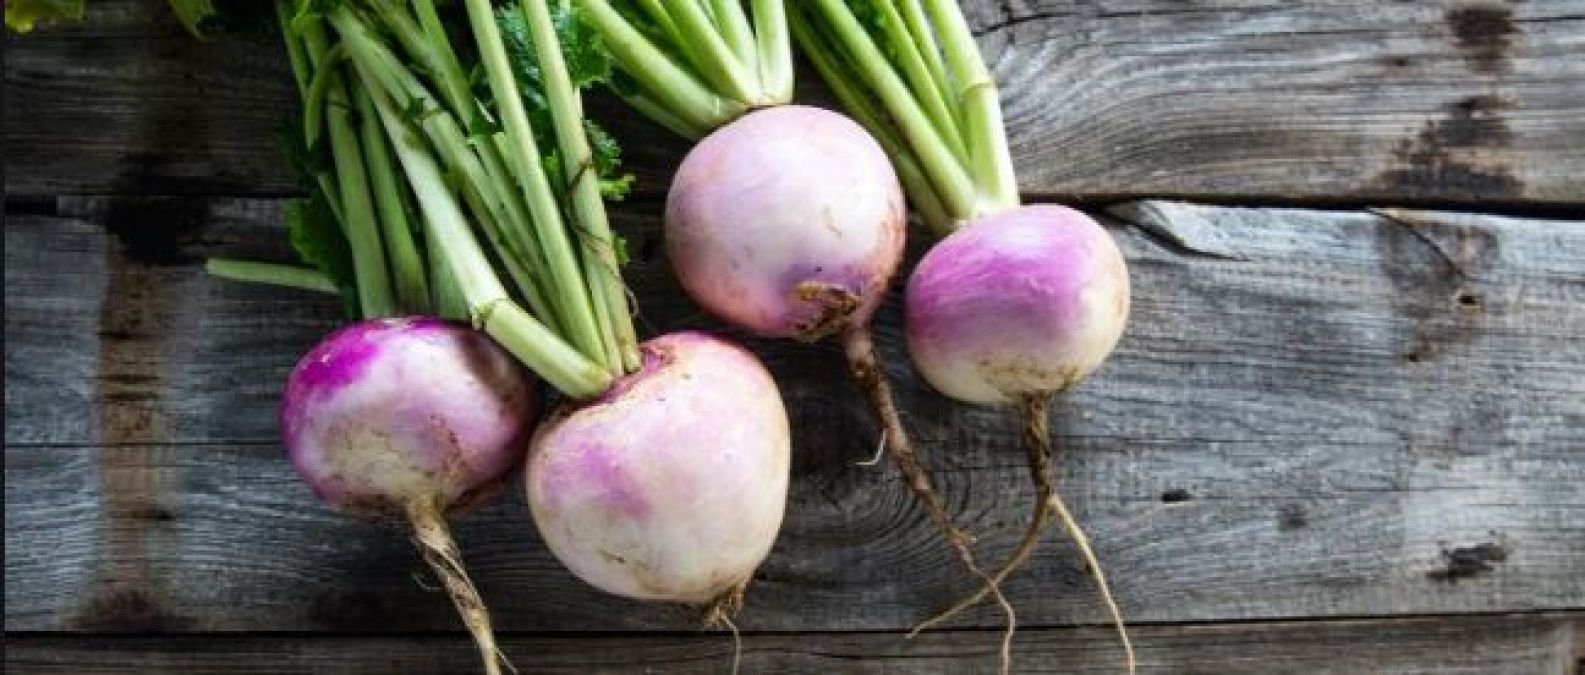 Turnip is a boon for health in winter, know the benefits